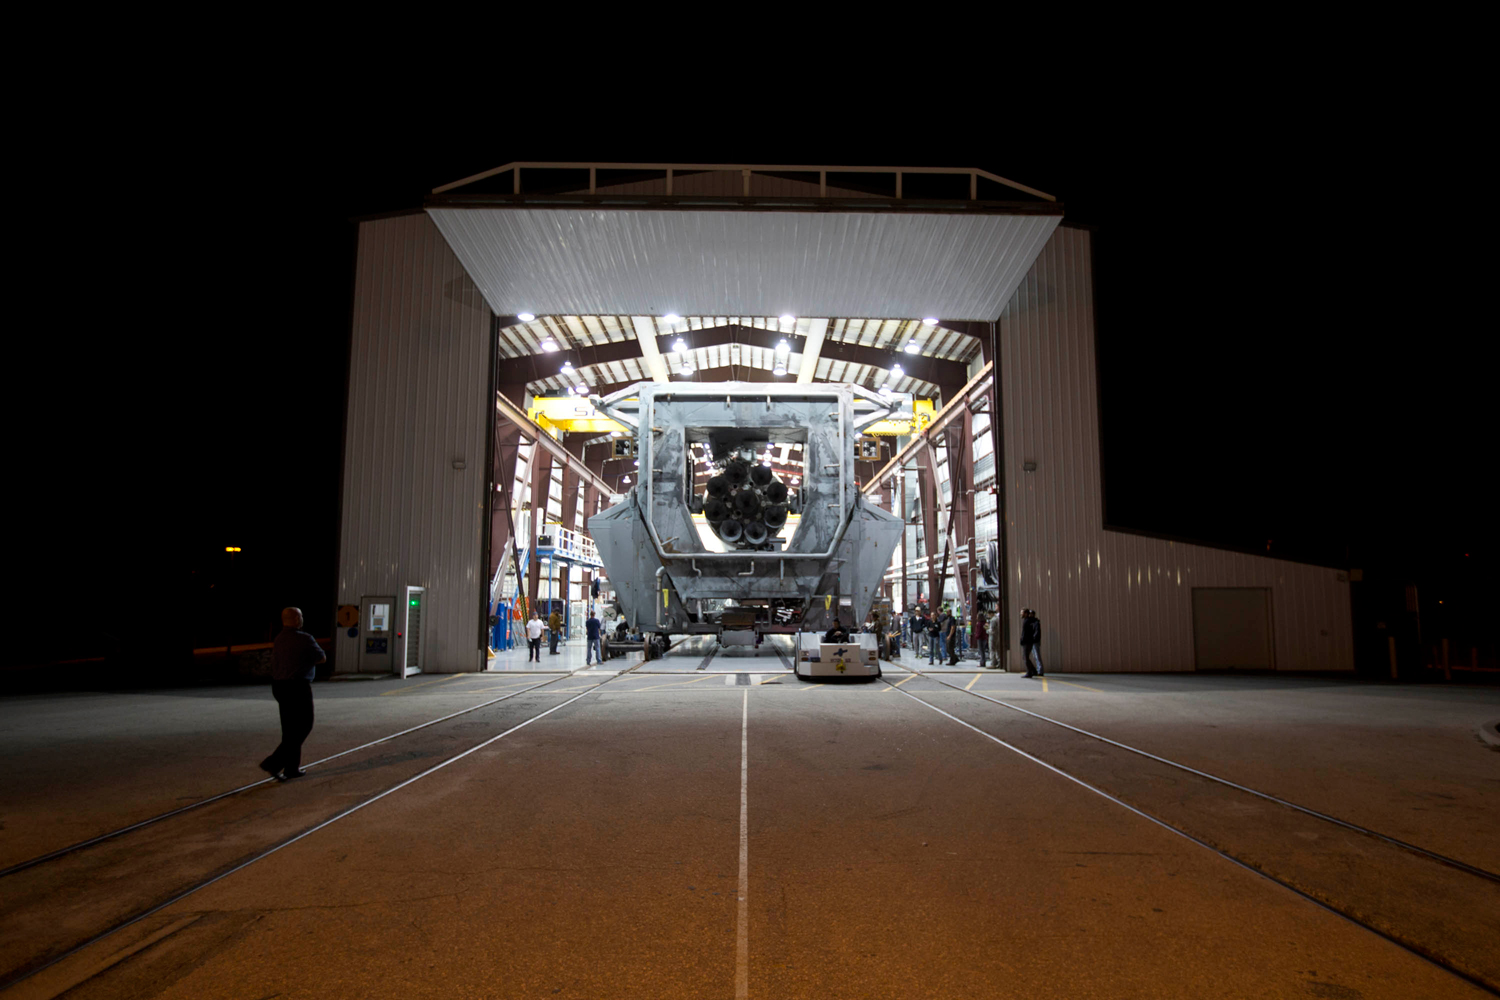 SpaceX's Falcon 9 rolls out of the hangar for SES 8 on Nov. 28, 2013.